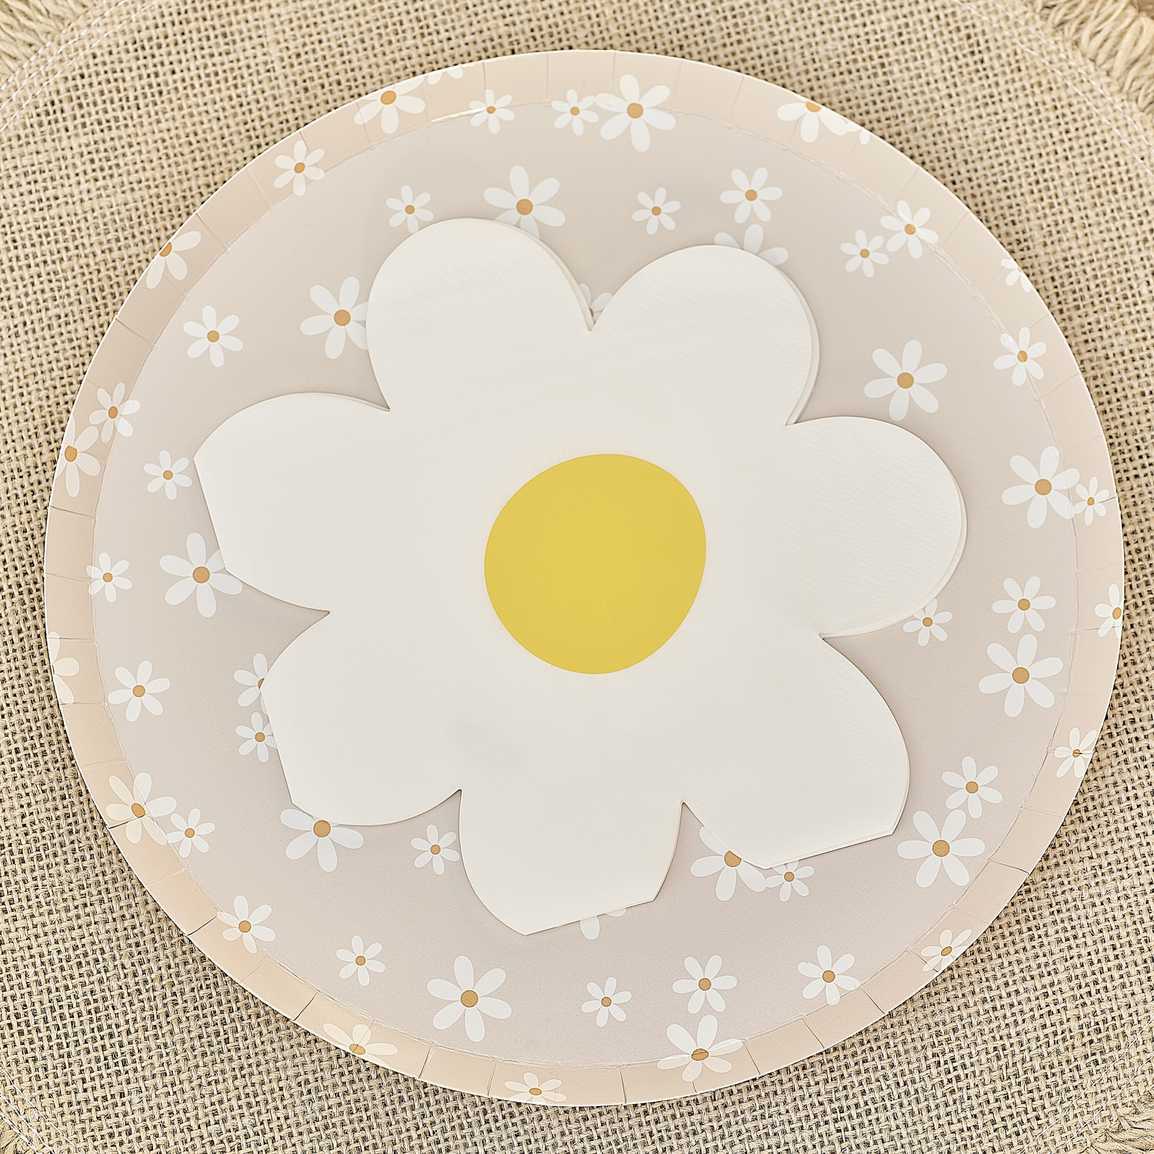 From the new Ditsy Daisy collection by Ginger Ray, these sweet daisy-shaped paper napkins will be loved by all.

l8r.it/9oZh

#ditsydaisy #daisycrazy #kidsparty #partysupplies #daisynapkins #partytable #gingerray #joliefeteuk #floralbirthday #flowernapkins